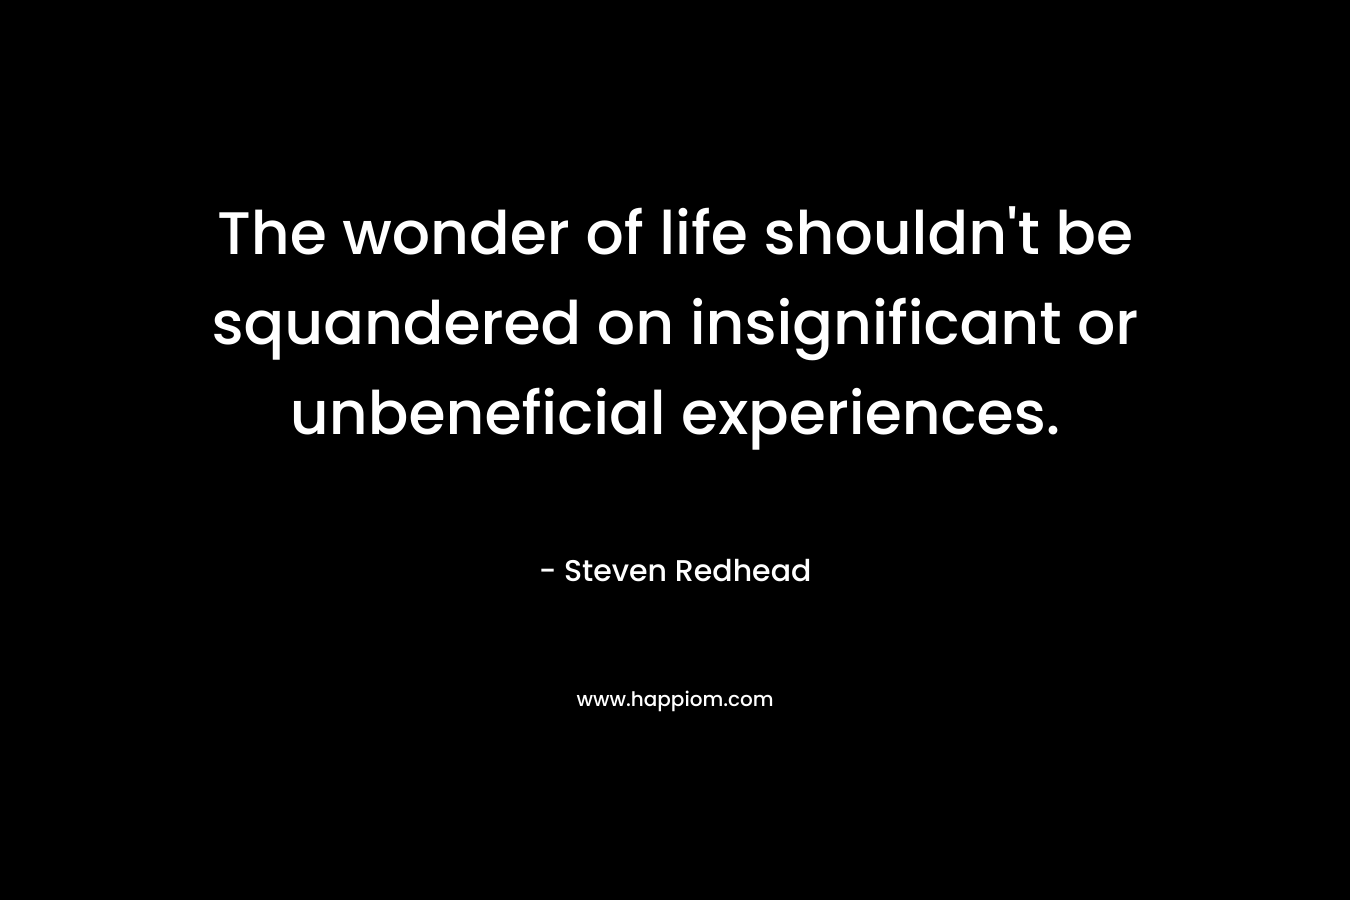 The wonder of life shouldn’t be squandered on insignificant or unbeneficial experiences. – Steven Redhead